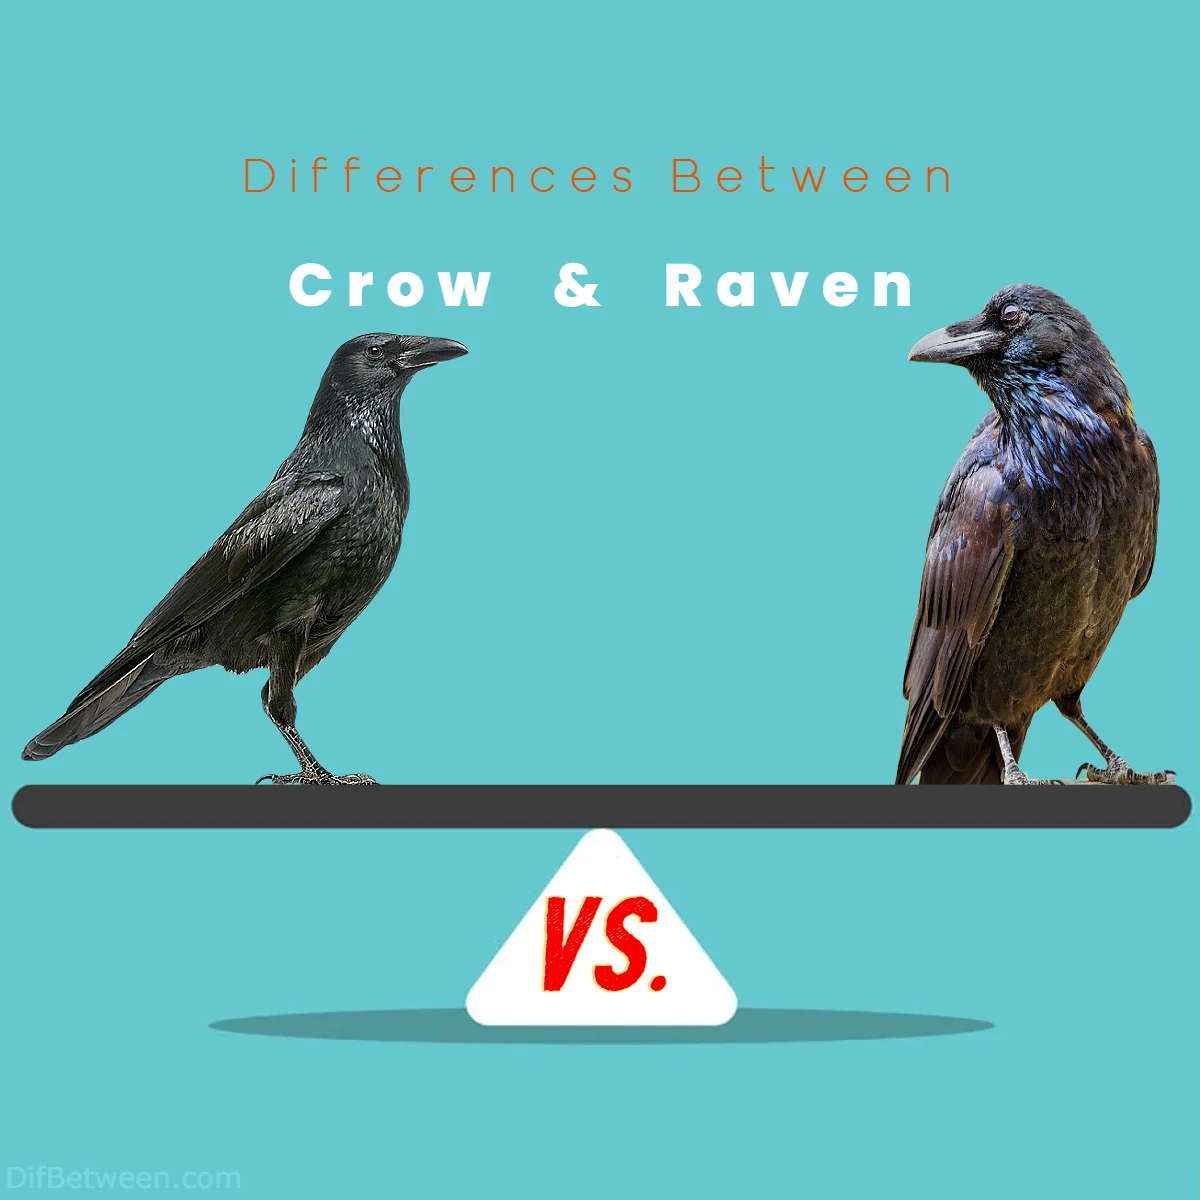 Differences Between Crow vs Raven